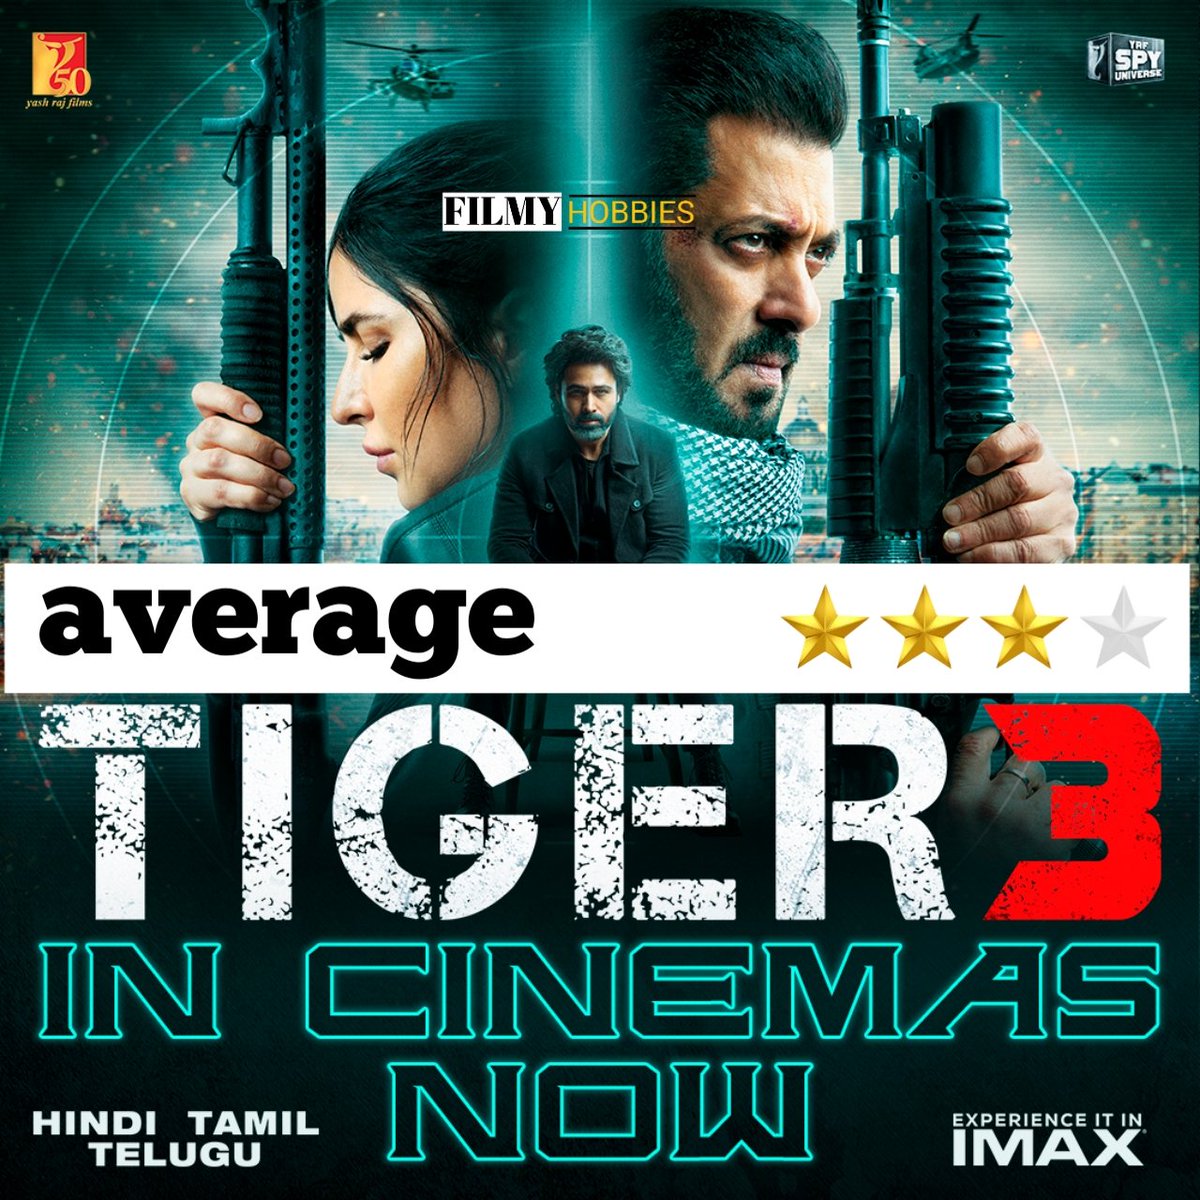 #MovieReview #Tiger3 : it's pure average type entertaining film. only show & Hype a Massive Entry to all Cast. But intro are very impressive Like. #EmraanHashmi & #SalmanKhan #KatrinaKaif but story same as other parts. #YRF Delevery shorts average entertainment. #Tiger3Review